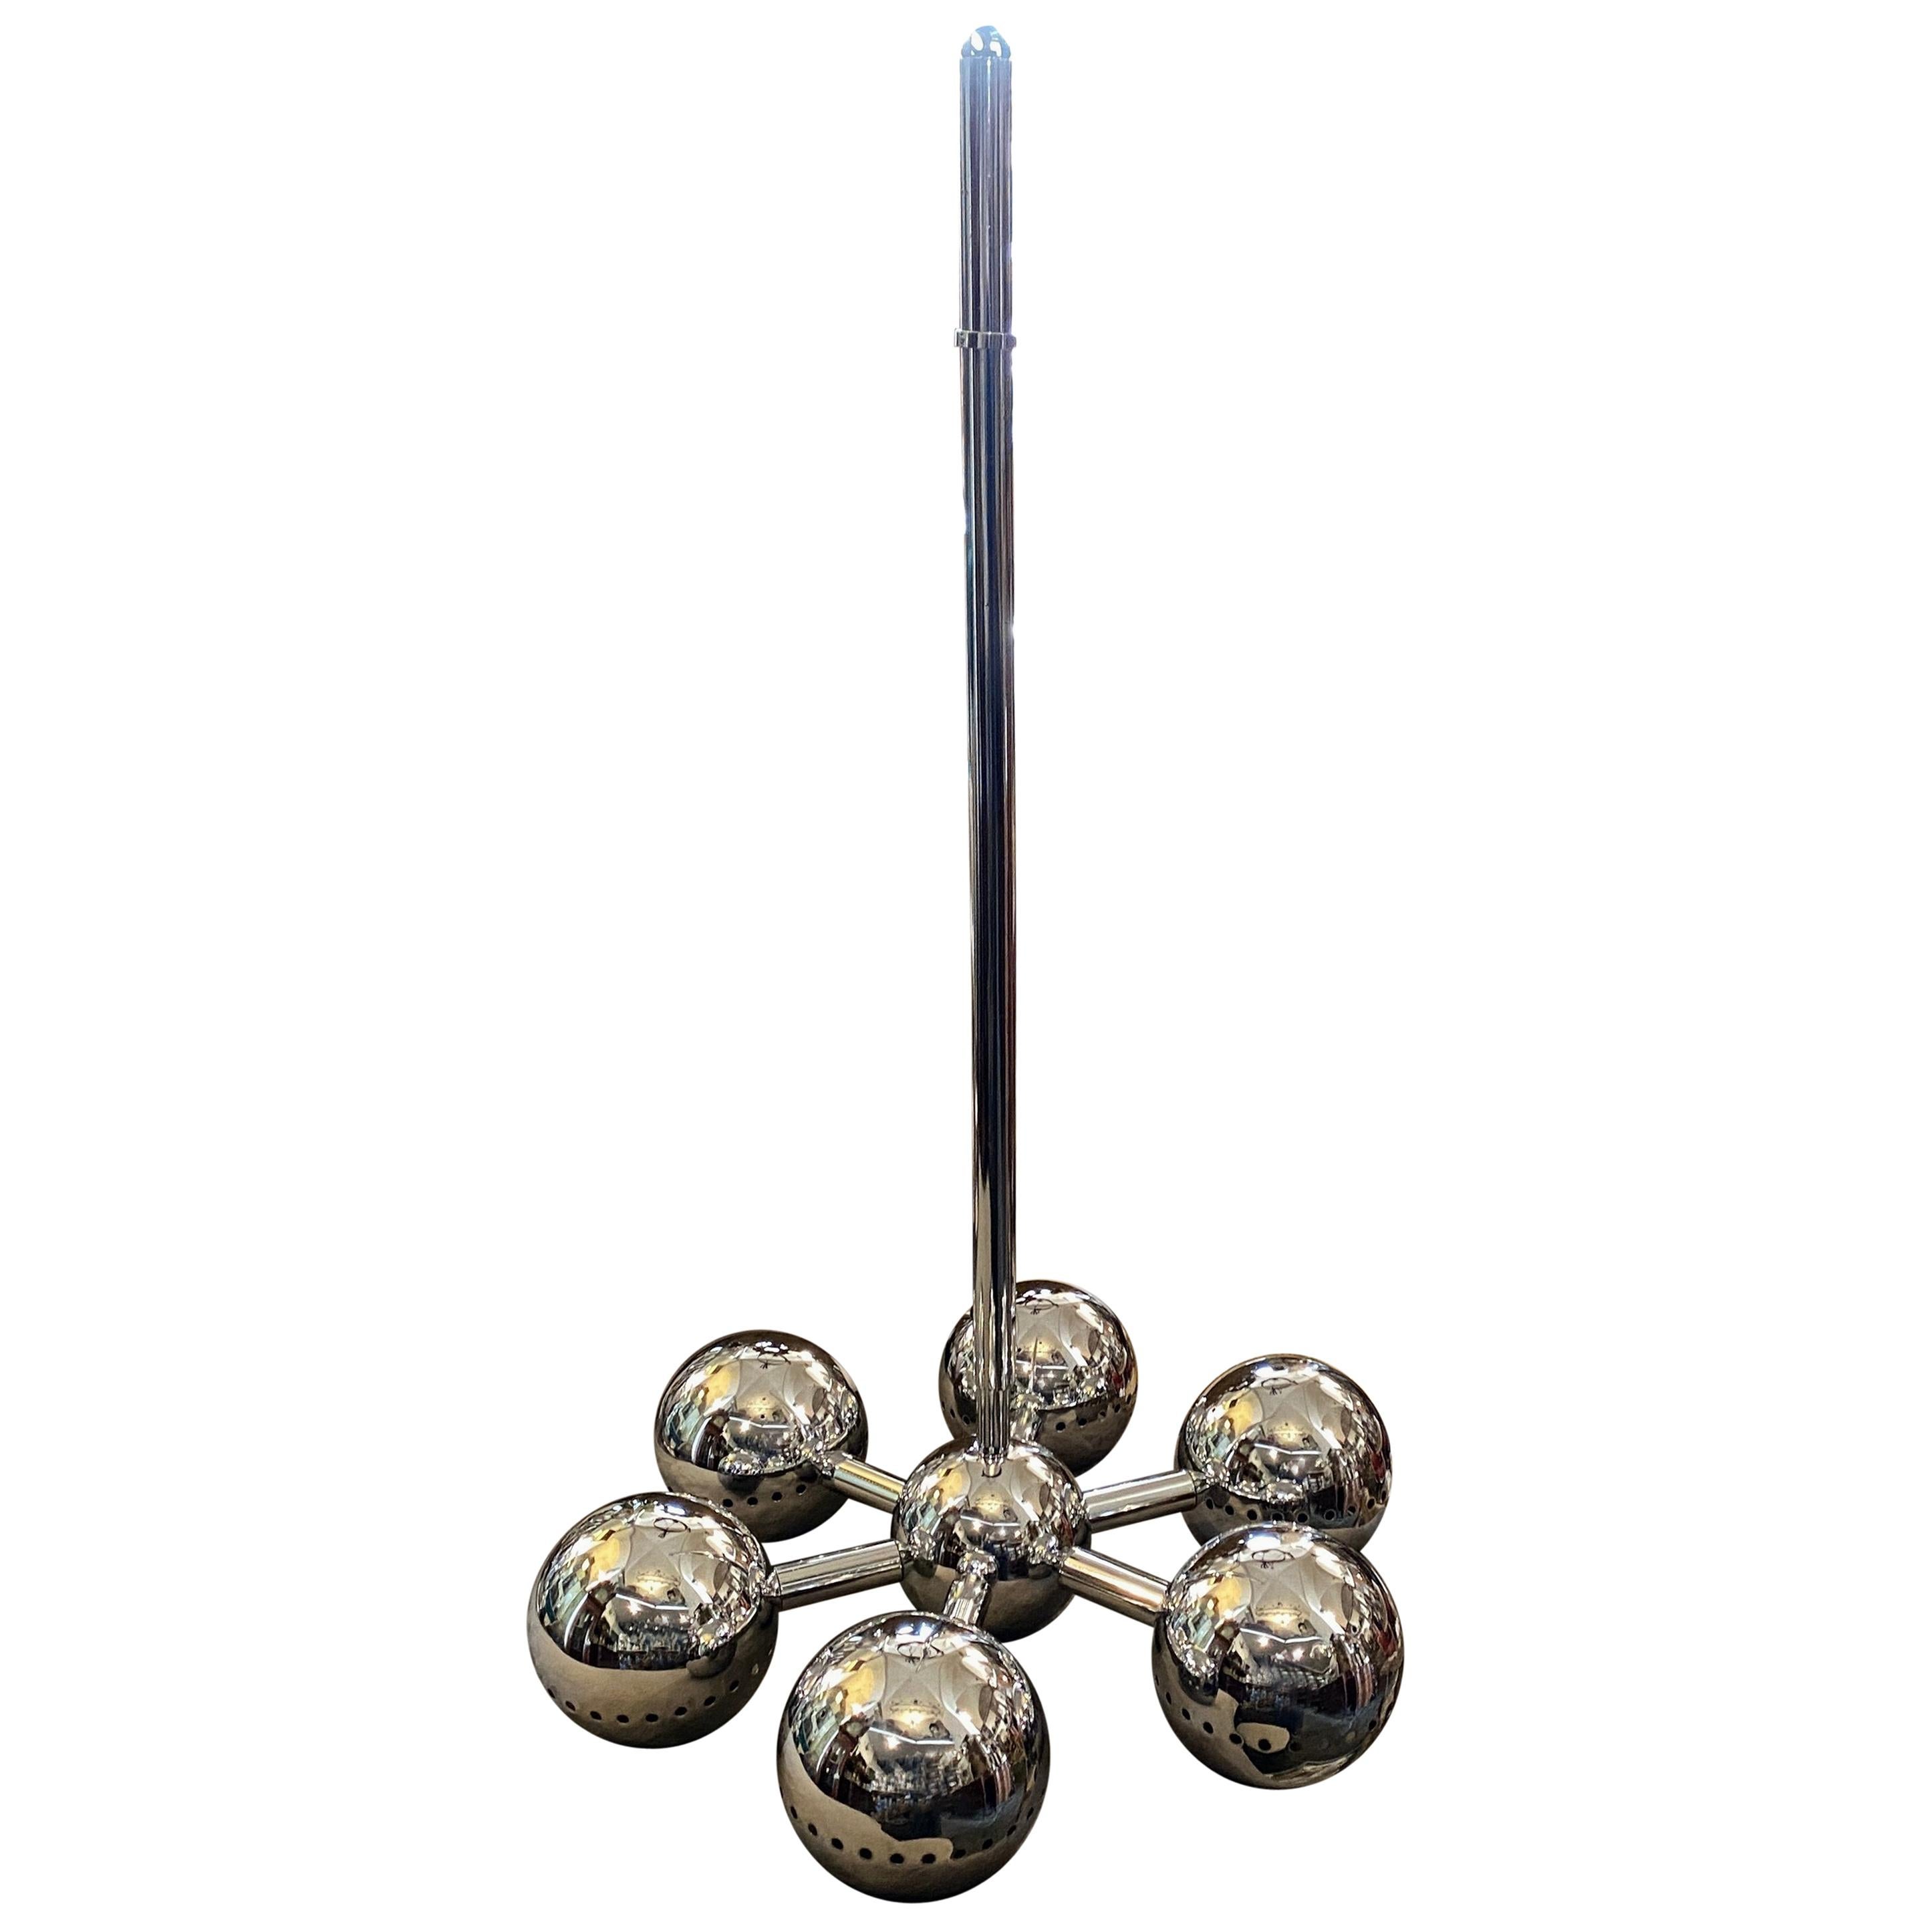 1970s Space Age Steel Chromed Italian Chandelier Attributed to Reggiani